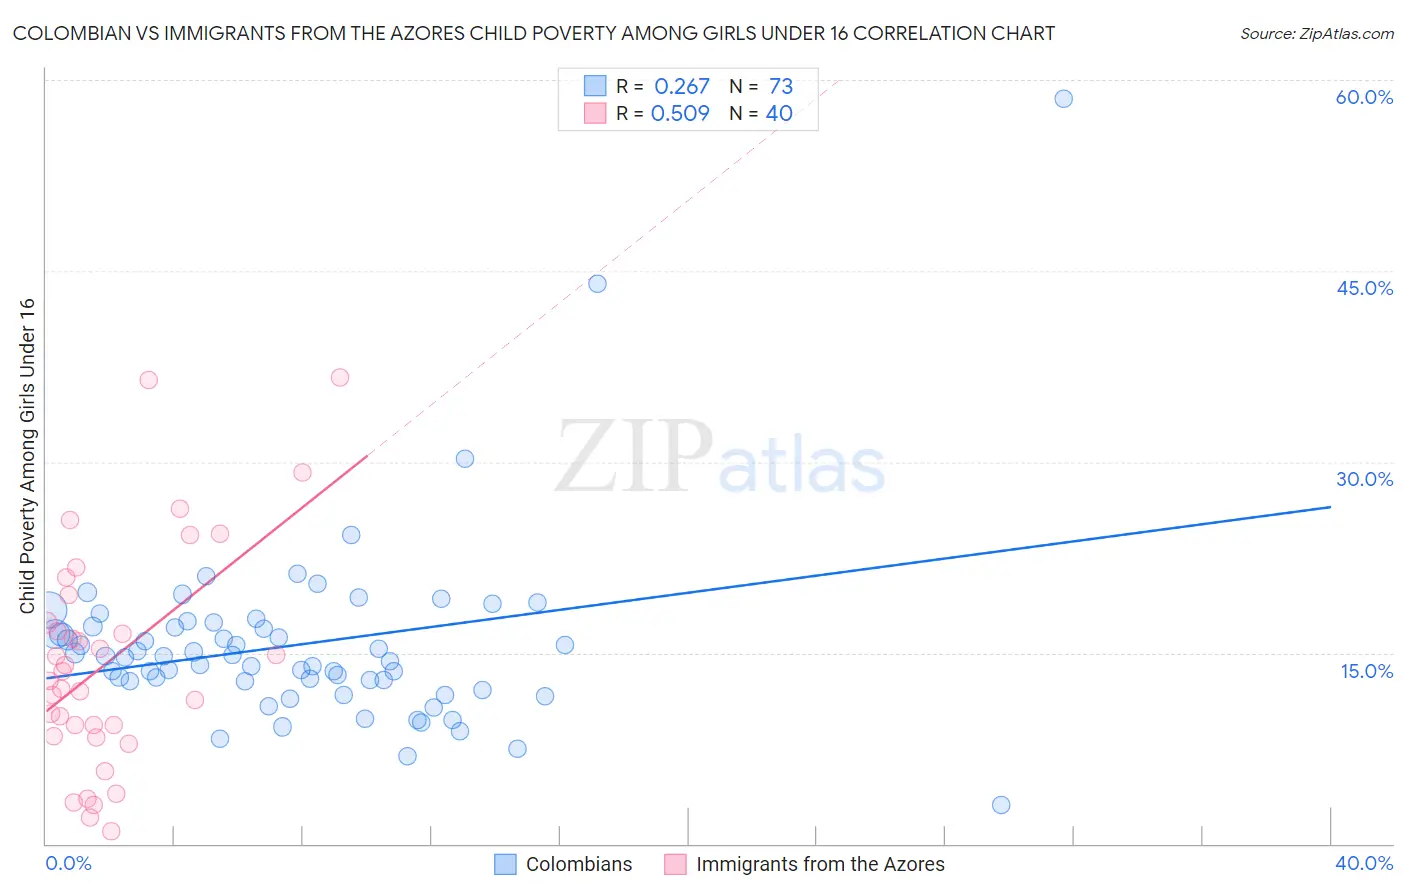 Colombian vs Immigrants from the Azores Child Poverty Among Girls Under 16